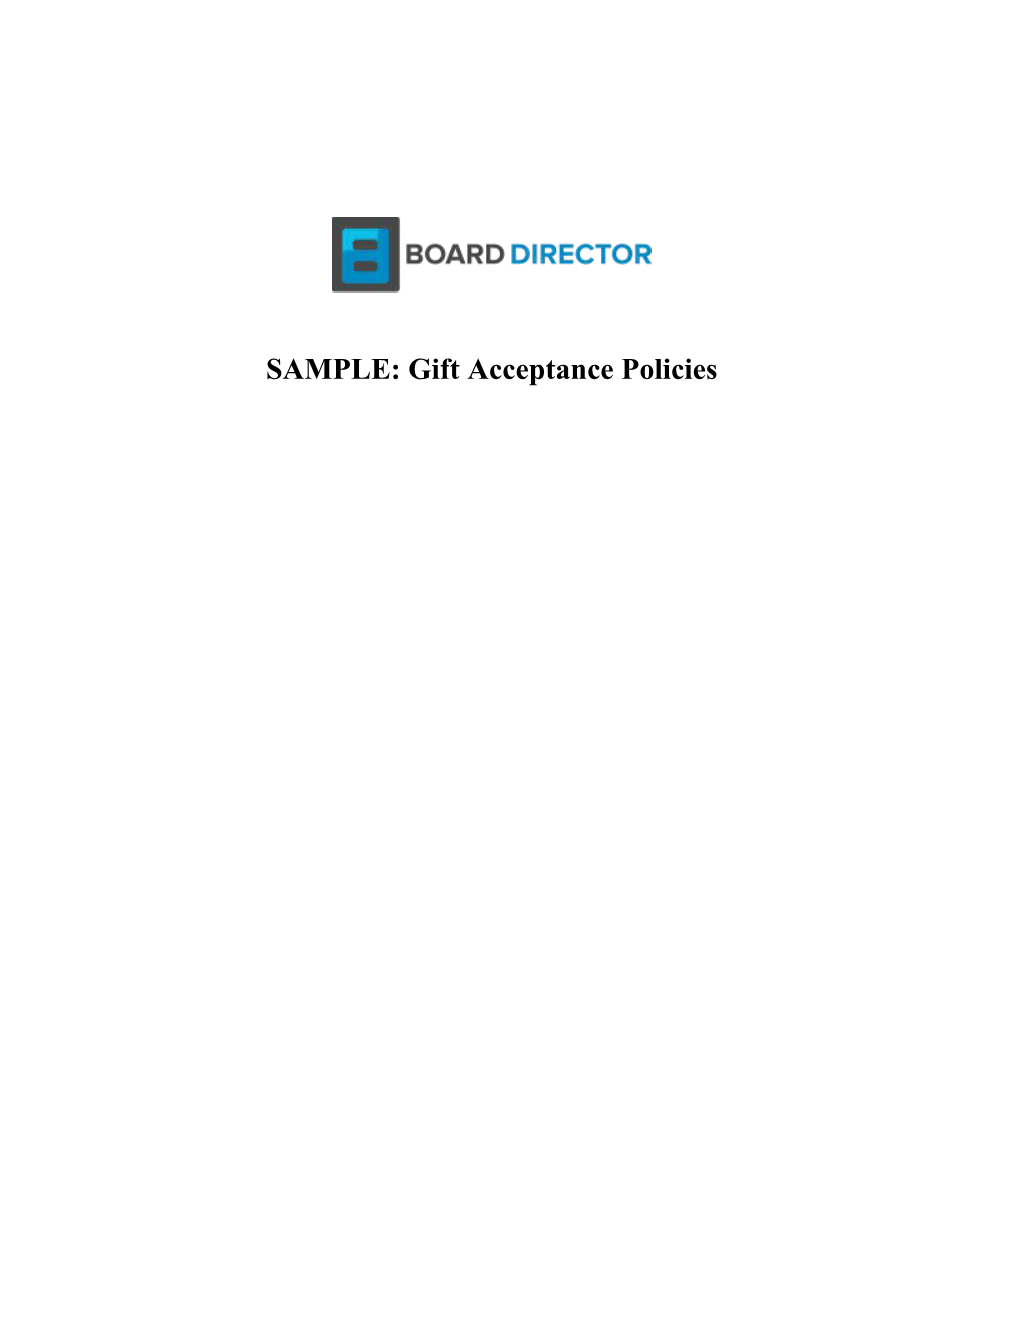 SAMPLE: Gift Acceptance Policies